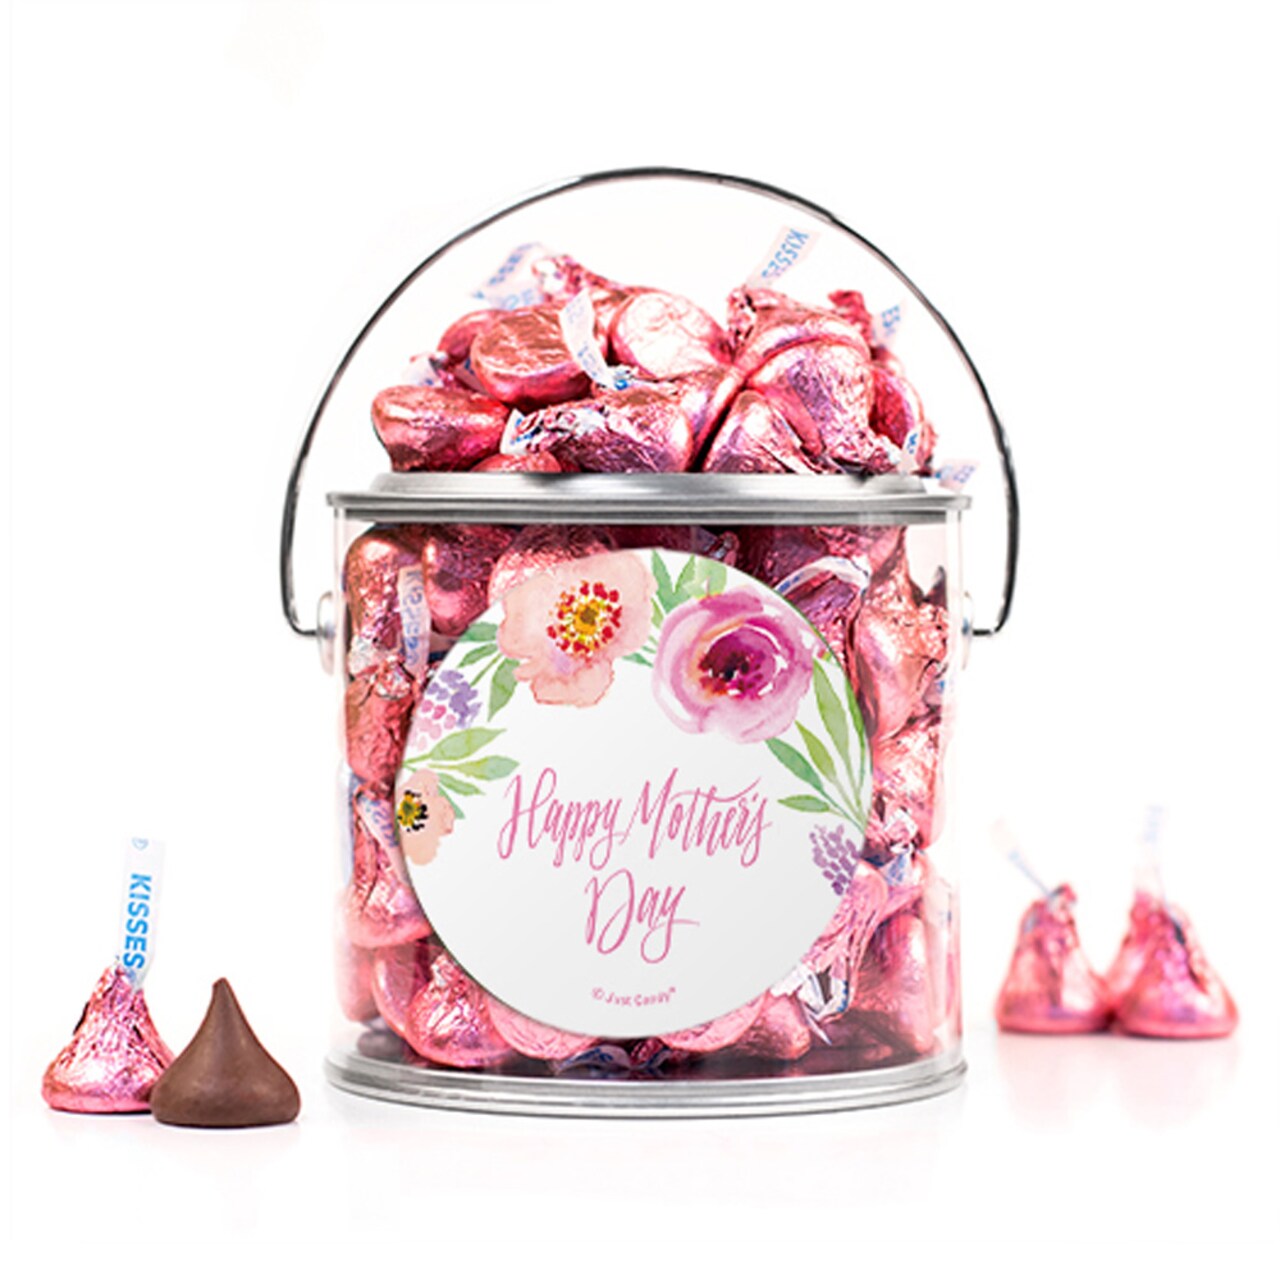 Mother&#x27;s Day Candy Gift with Hershey&#x27;s Kisses Milk Chocolate - By Just Candy